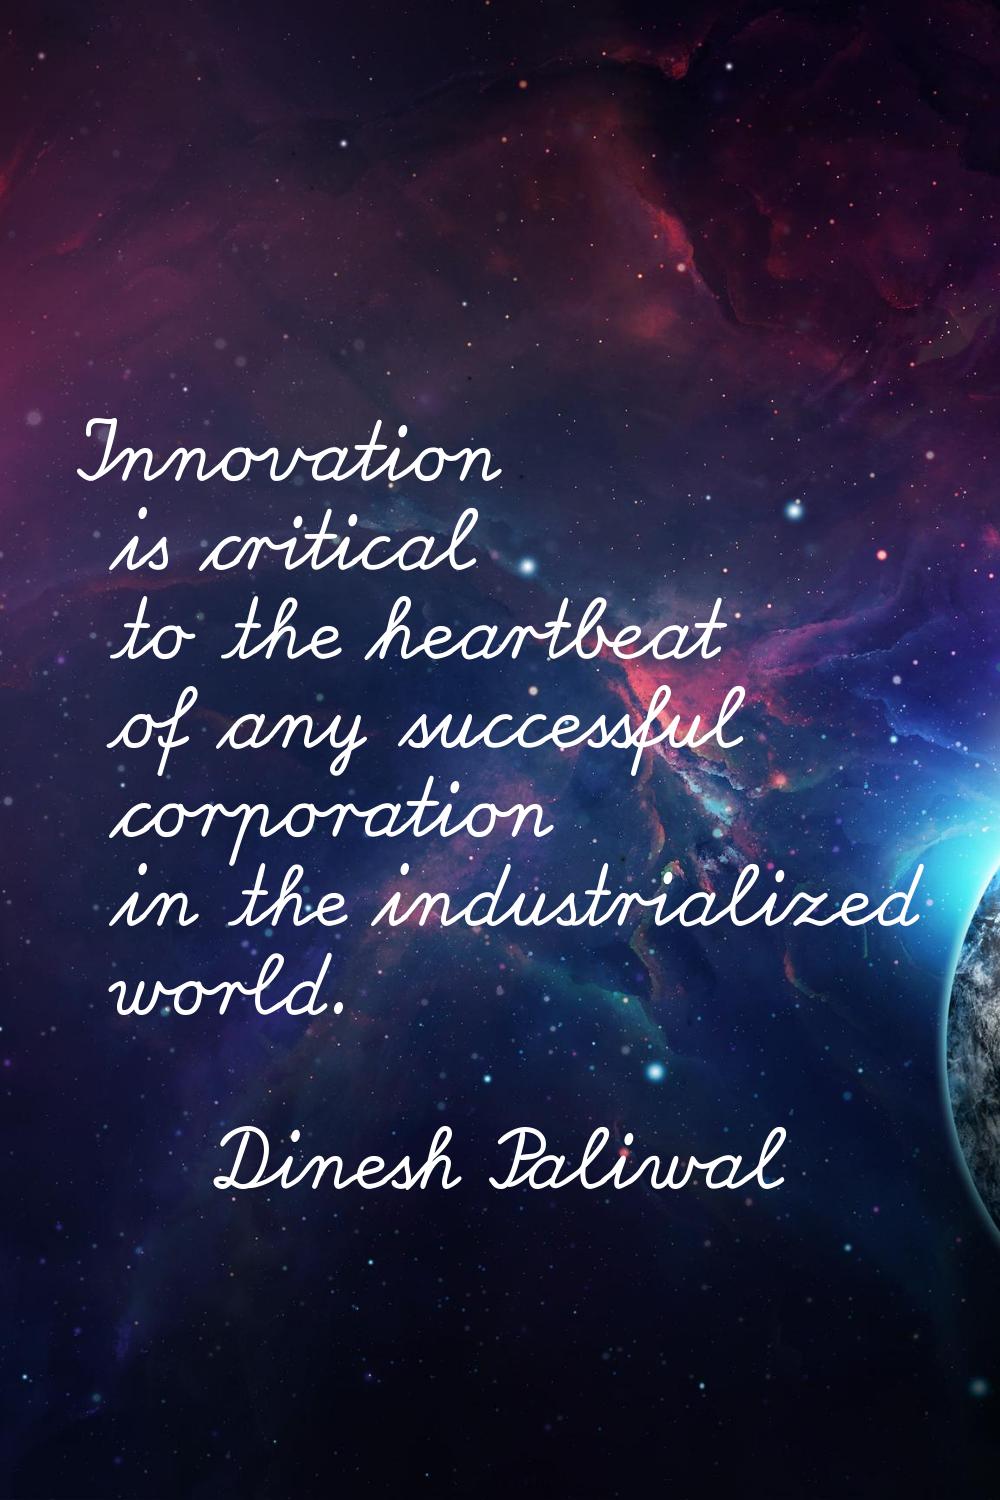 Innovation is critical to the heartbeat of any successful corporation in the industrialized world.